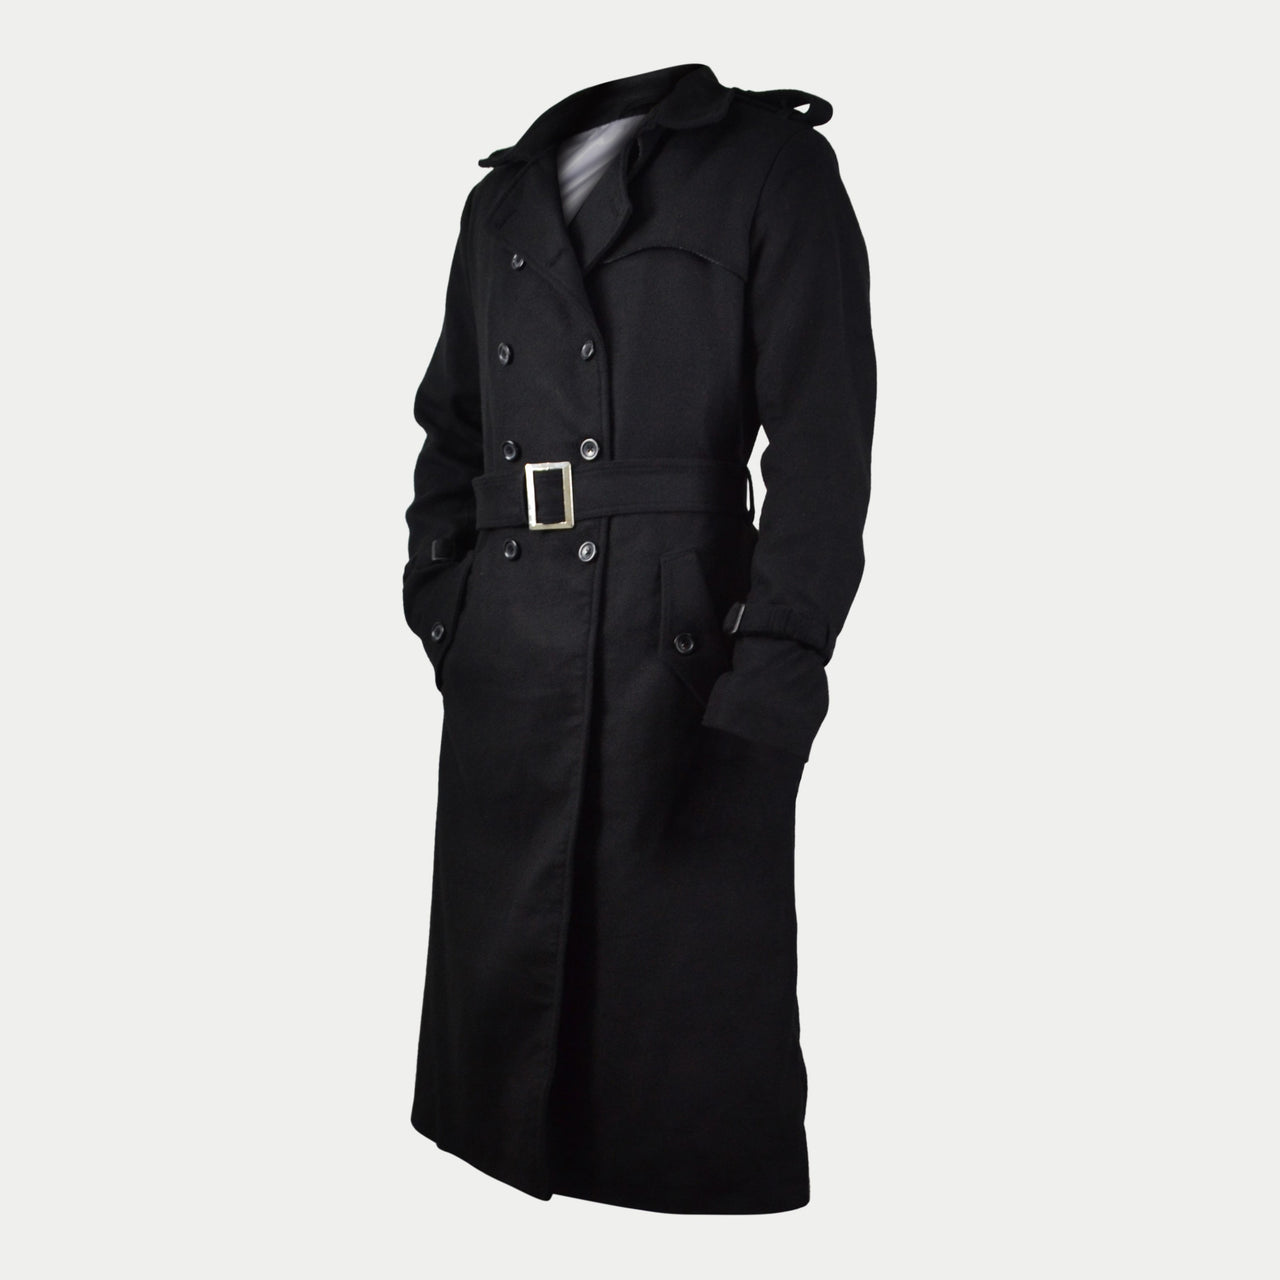 Men's Black Long Double-Breasted Belted Real Wool Coat